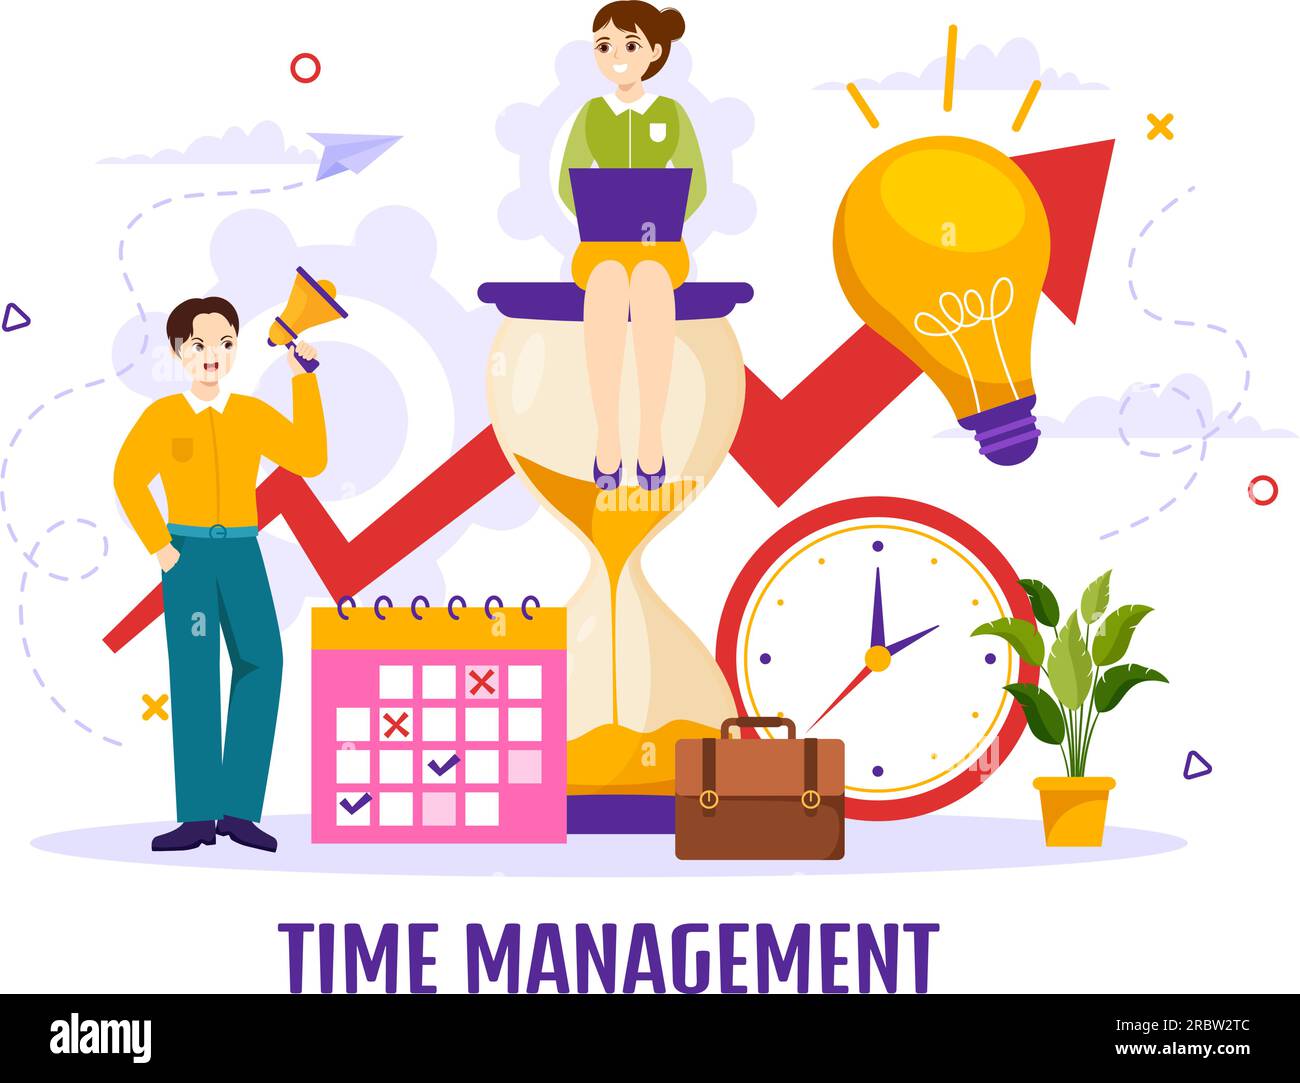 Time Management Vector Illustration with Clock Controls and Tasks Planning Training Activities Schedule in Flat Cartoon Hand Drawn Templates Stock Vector